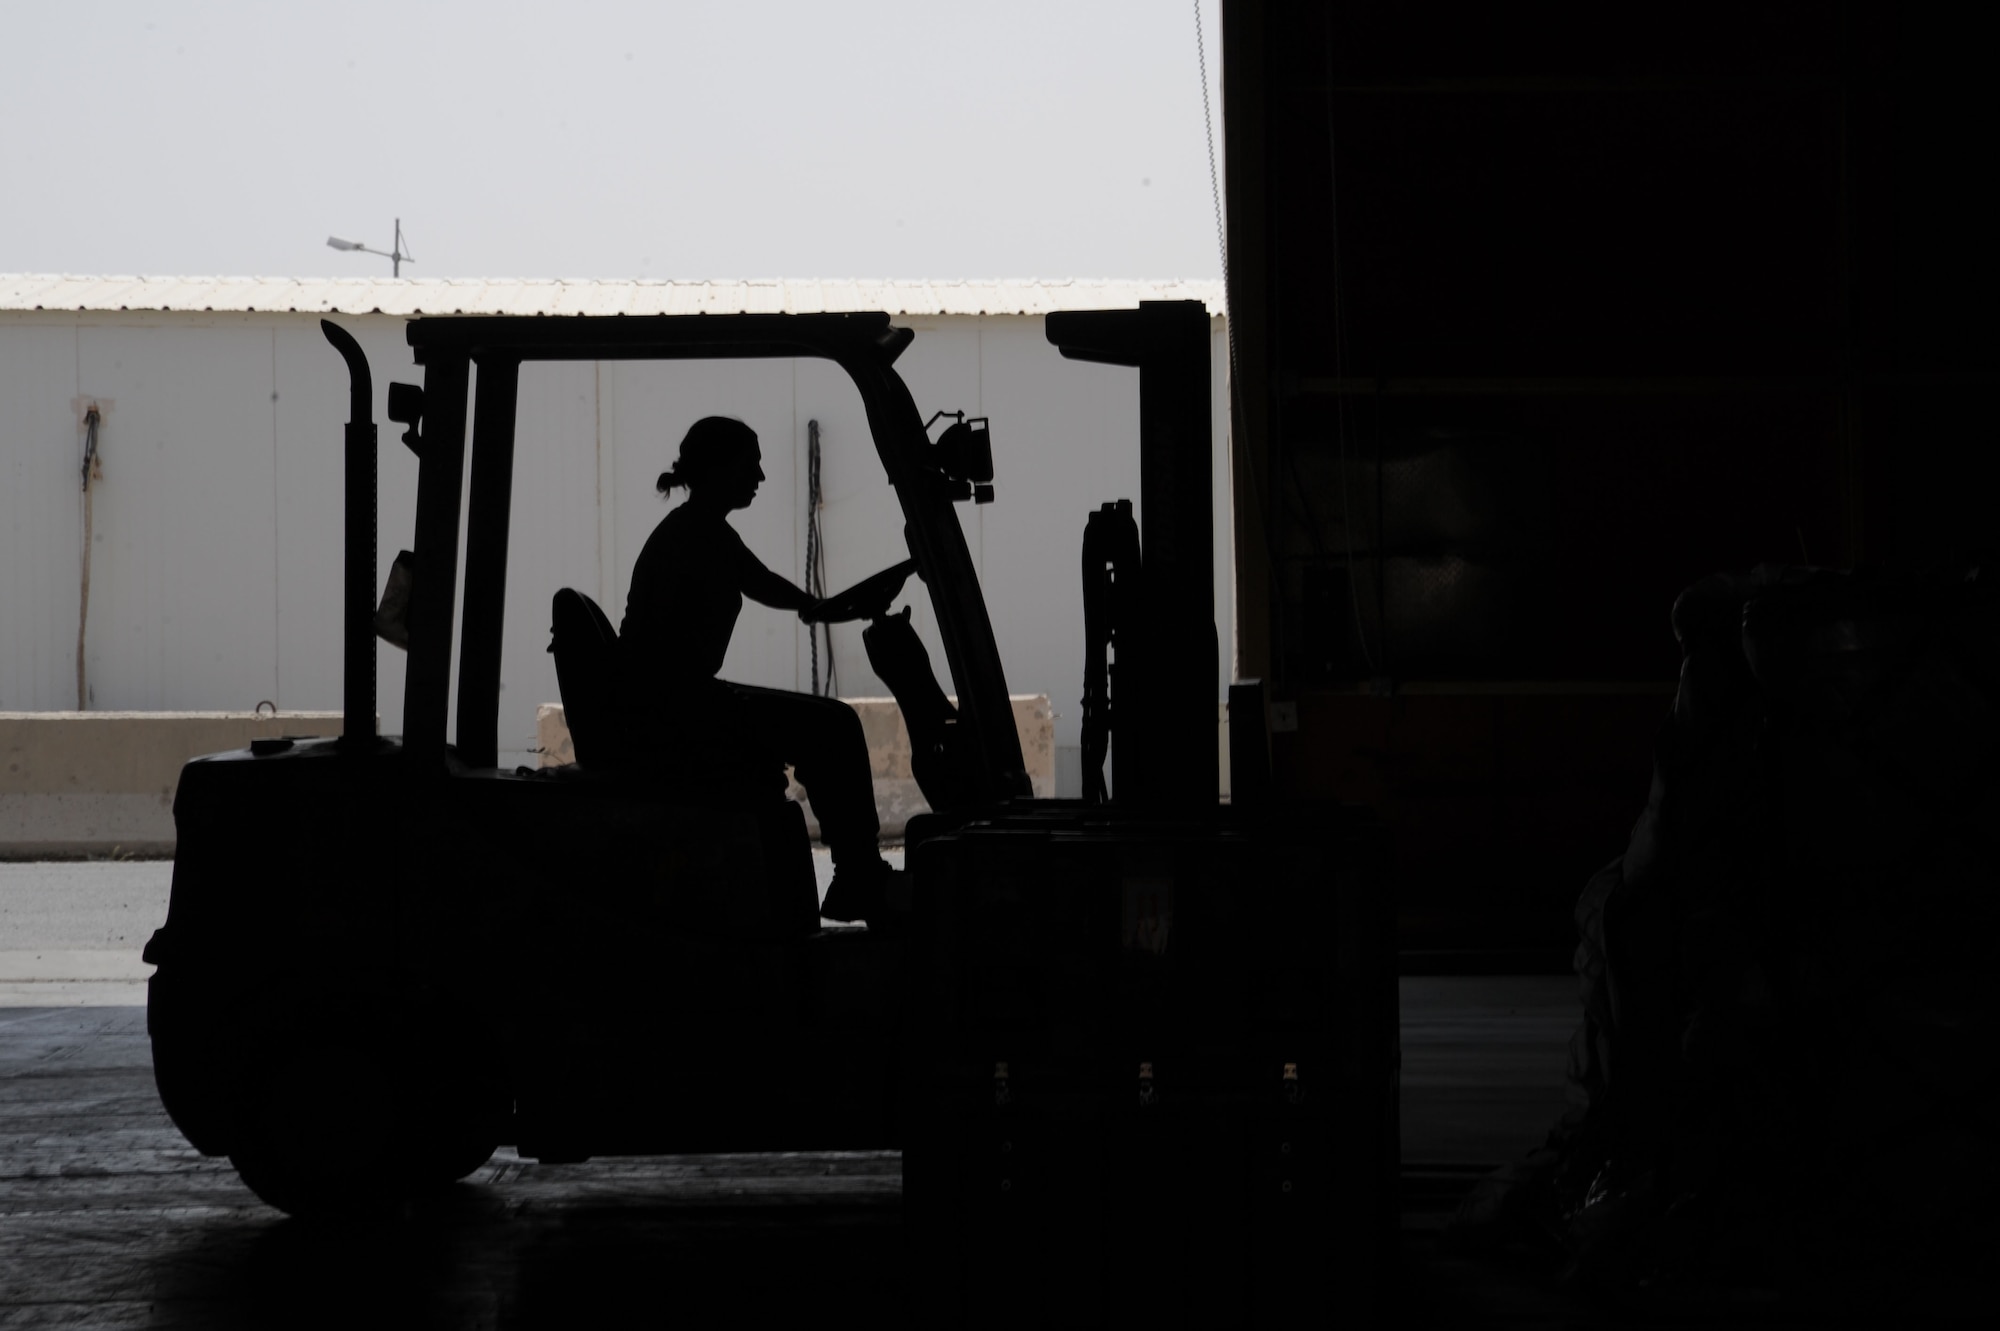 An Airman from the 386th Expeditionary Logistics Readiness Squadron aerial port flight operates a forklift July 21, 2016 at an undisclosed location in Southwest Asia. The 386 ELRS is home to the busiest aerial port in Southwest Asia. (U.S. Air Force photo/Senior Airman Zachary Kee)